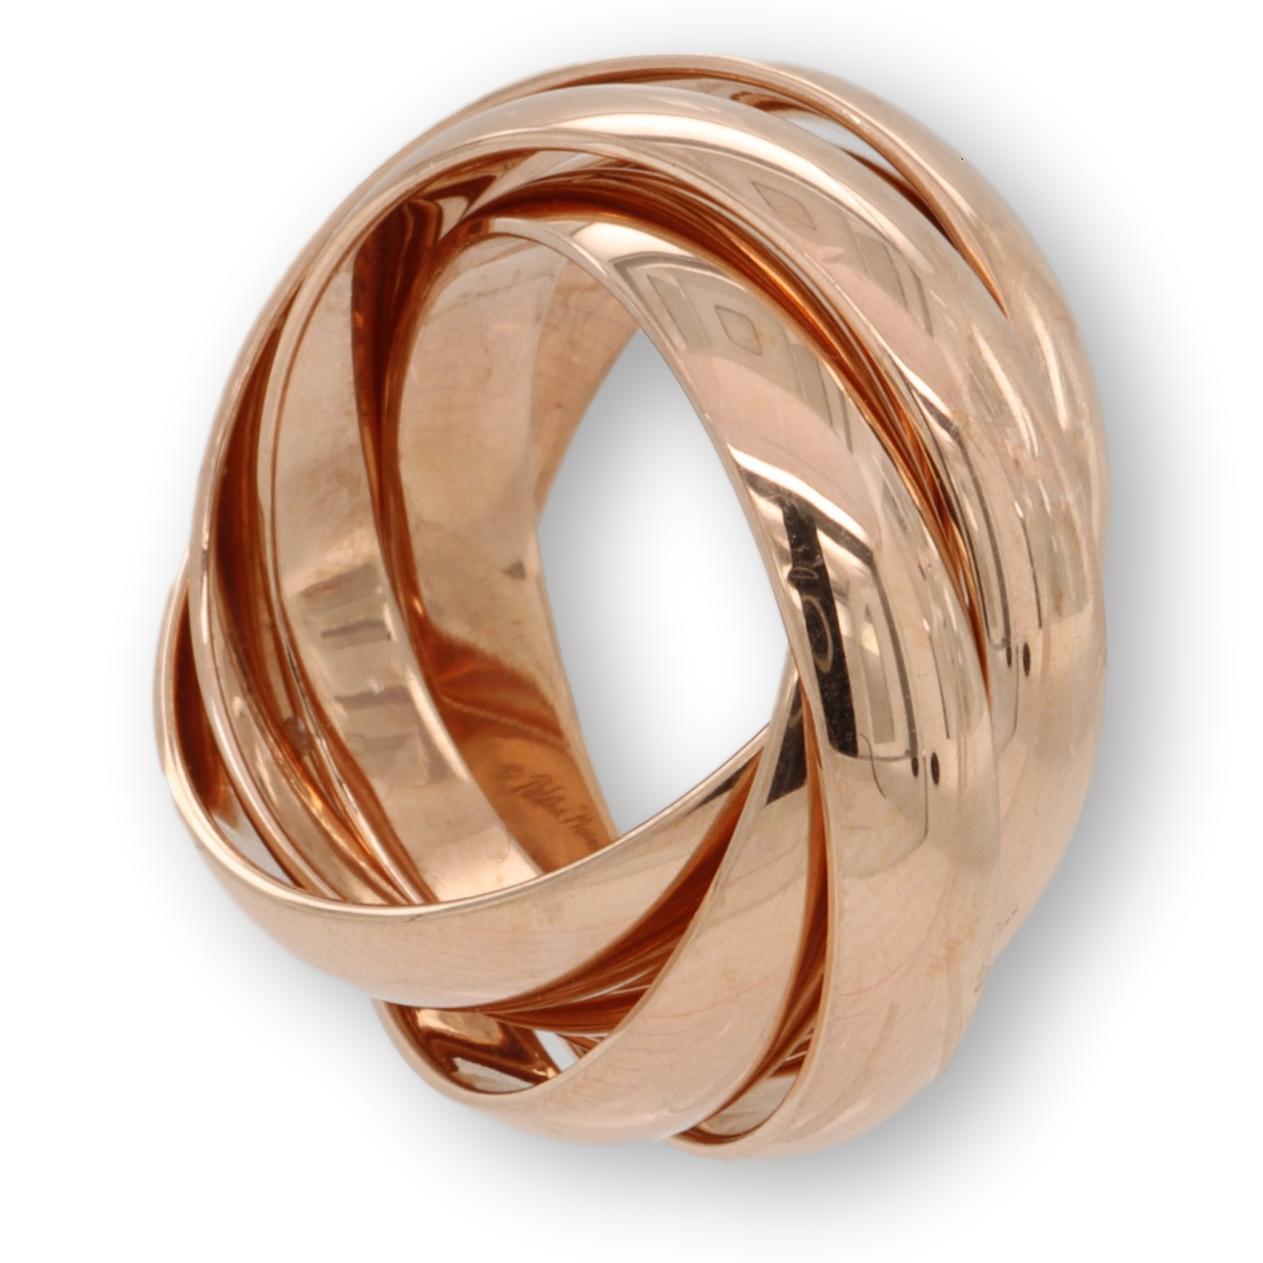 Tiffany & Co. rolling ring from the Melody collection designed by Paloma Picasso finely crafted in 18 karat rose gold with 5 interlocking bands measuring 3.9 mm wide each. This is an original design copyrighted by Paloma Picasso. Fully hallmarked